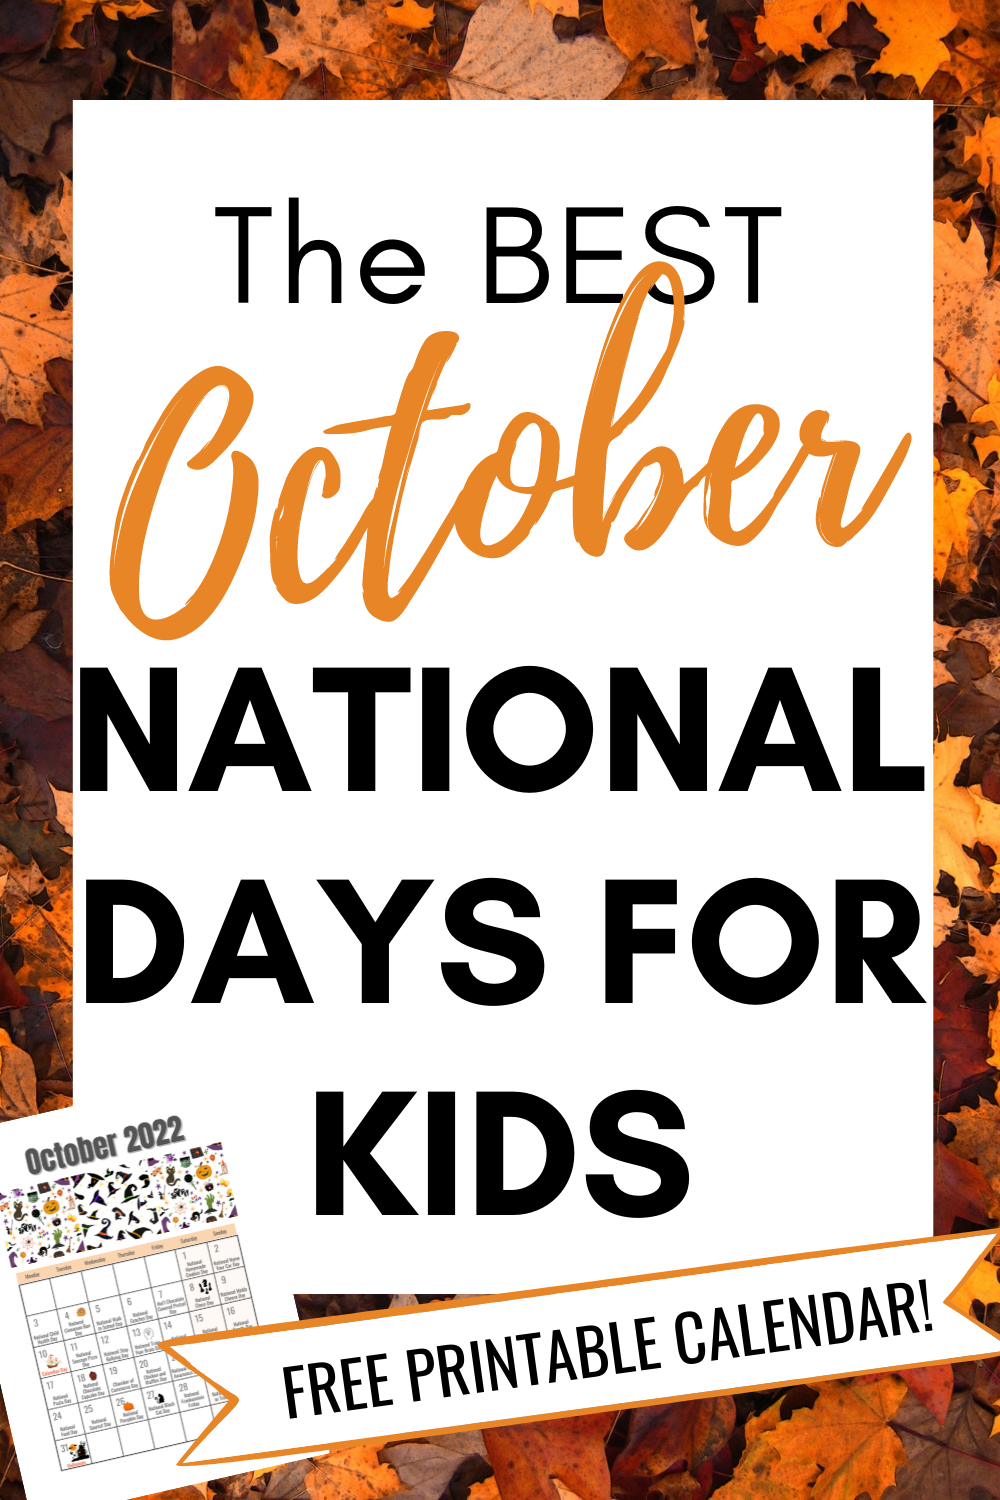 31 Awesome October National Days to Celebrate as a Family